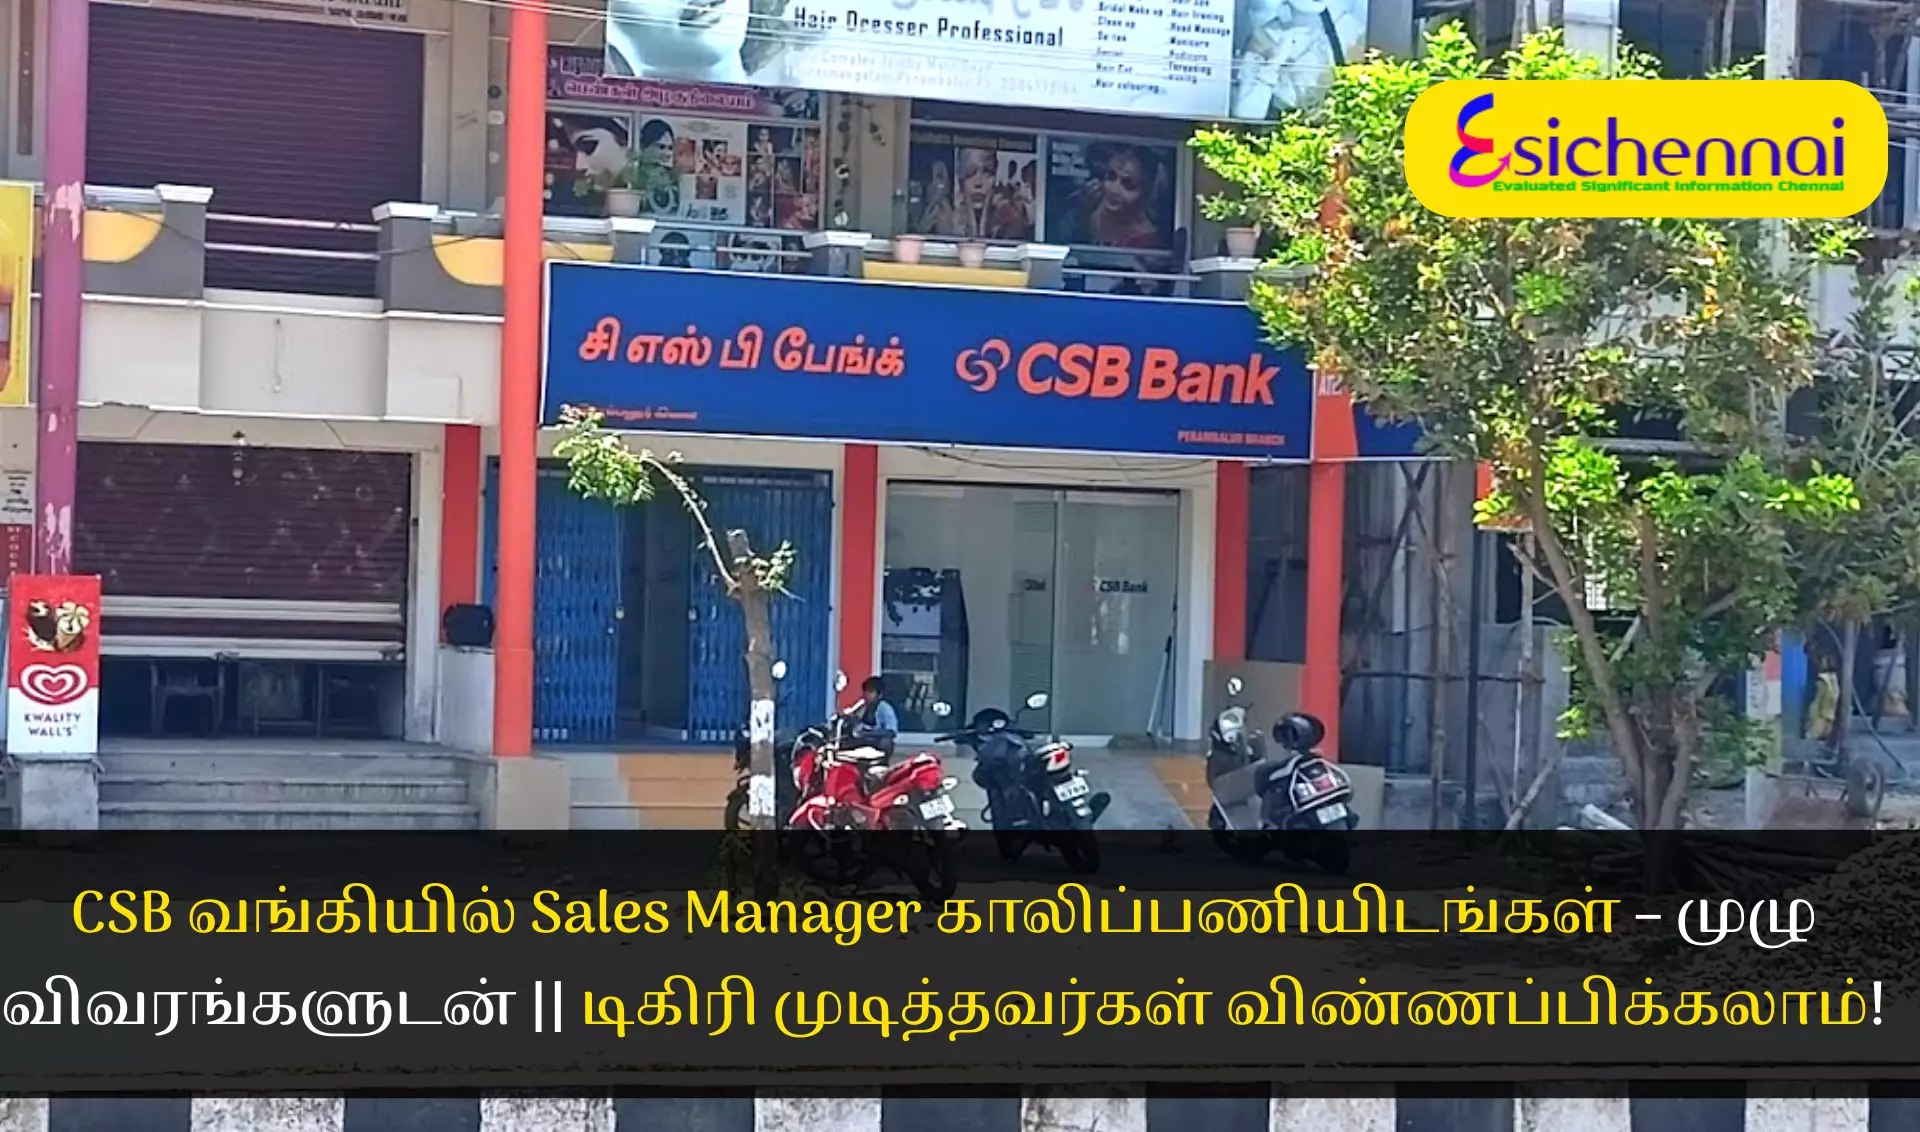 Sales Manager Vacancies in CSB Bank – With Full Details Degree completion candidates can apply!